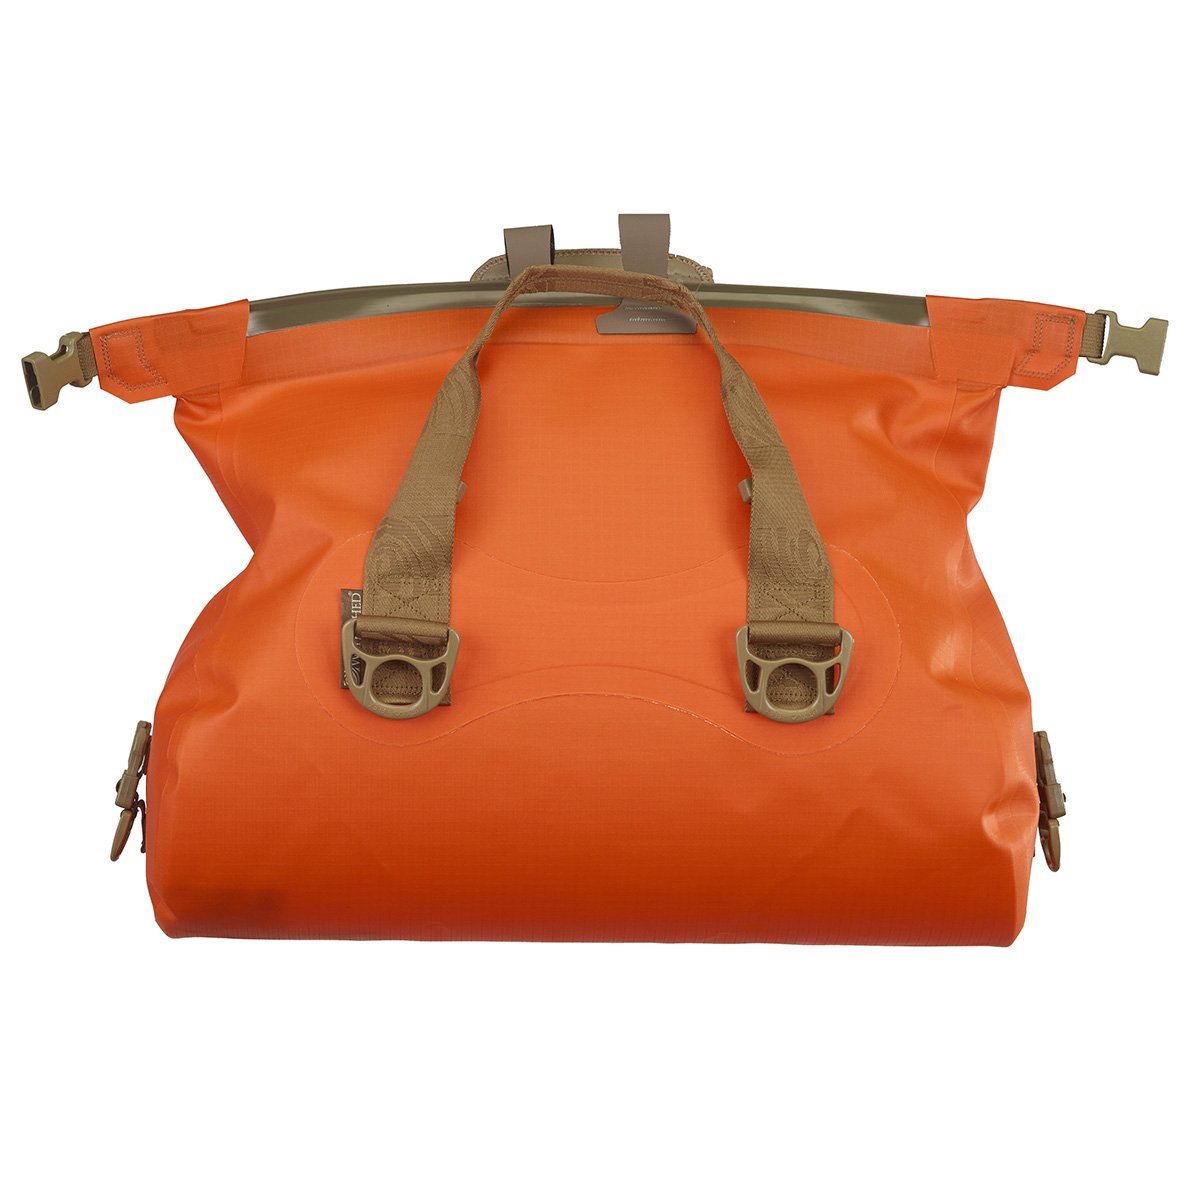 Chattooga Duffel - 29 Litre - Dry Bags